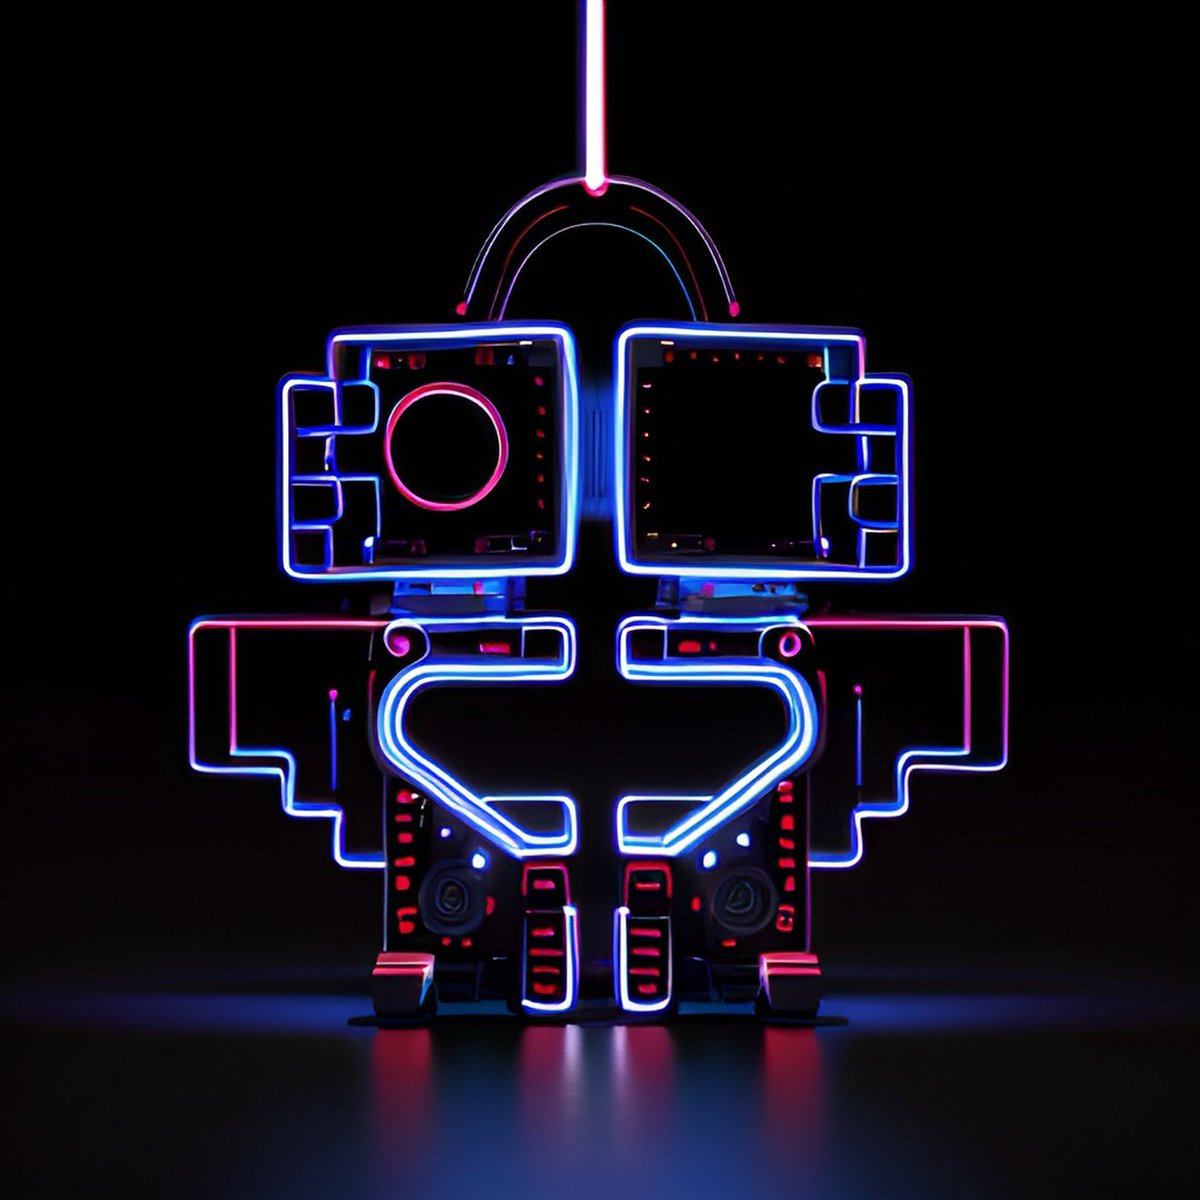 The wait is over 🎭
Abstract Droid was selected to be showcased at Beeple Studios tomorrow 🤍
What an honor - Thank you @beeple 👾
#abstractart #MayThe4th #BeepleStudios